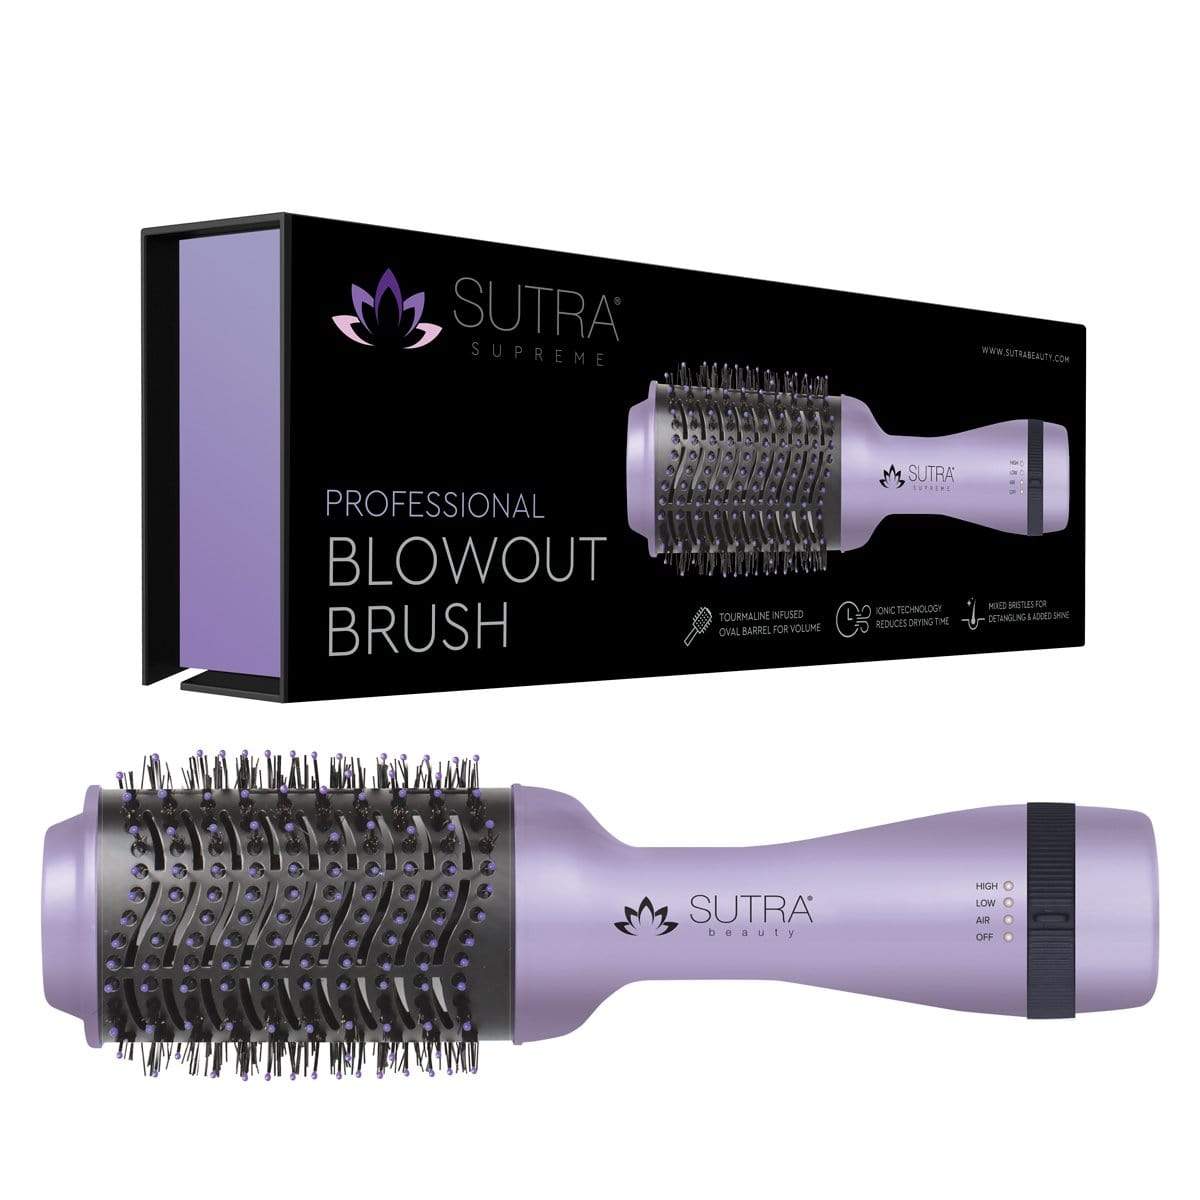 SB2 Professional 3 Blowout Brush by Sutra Beauty